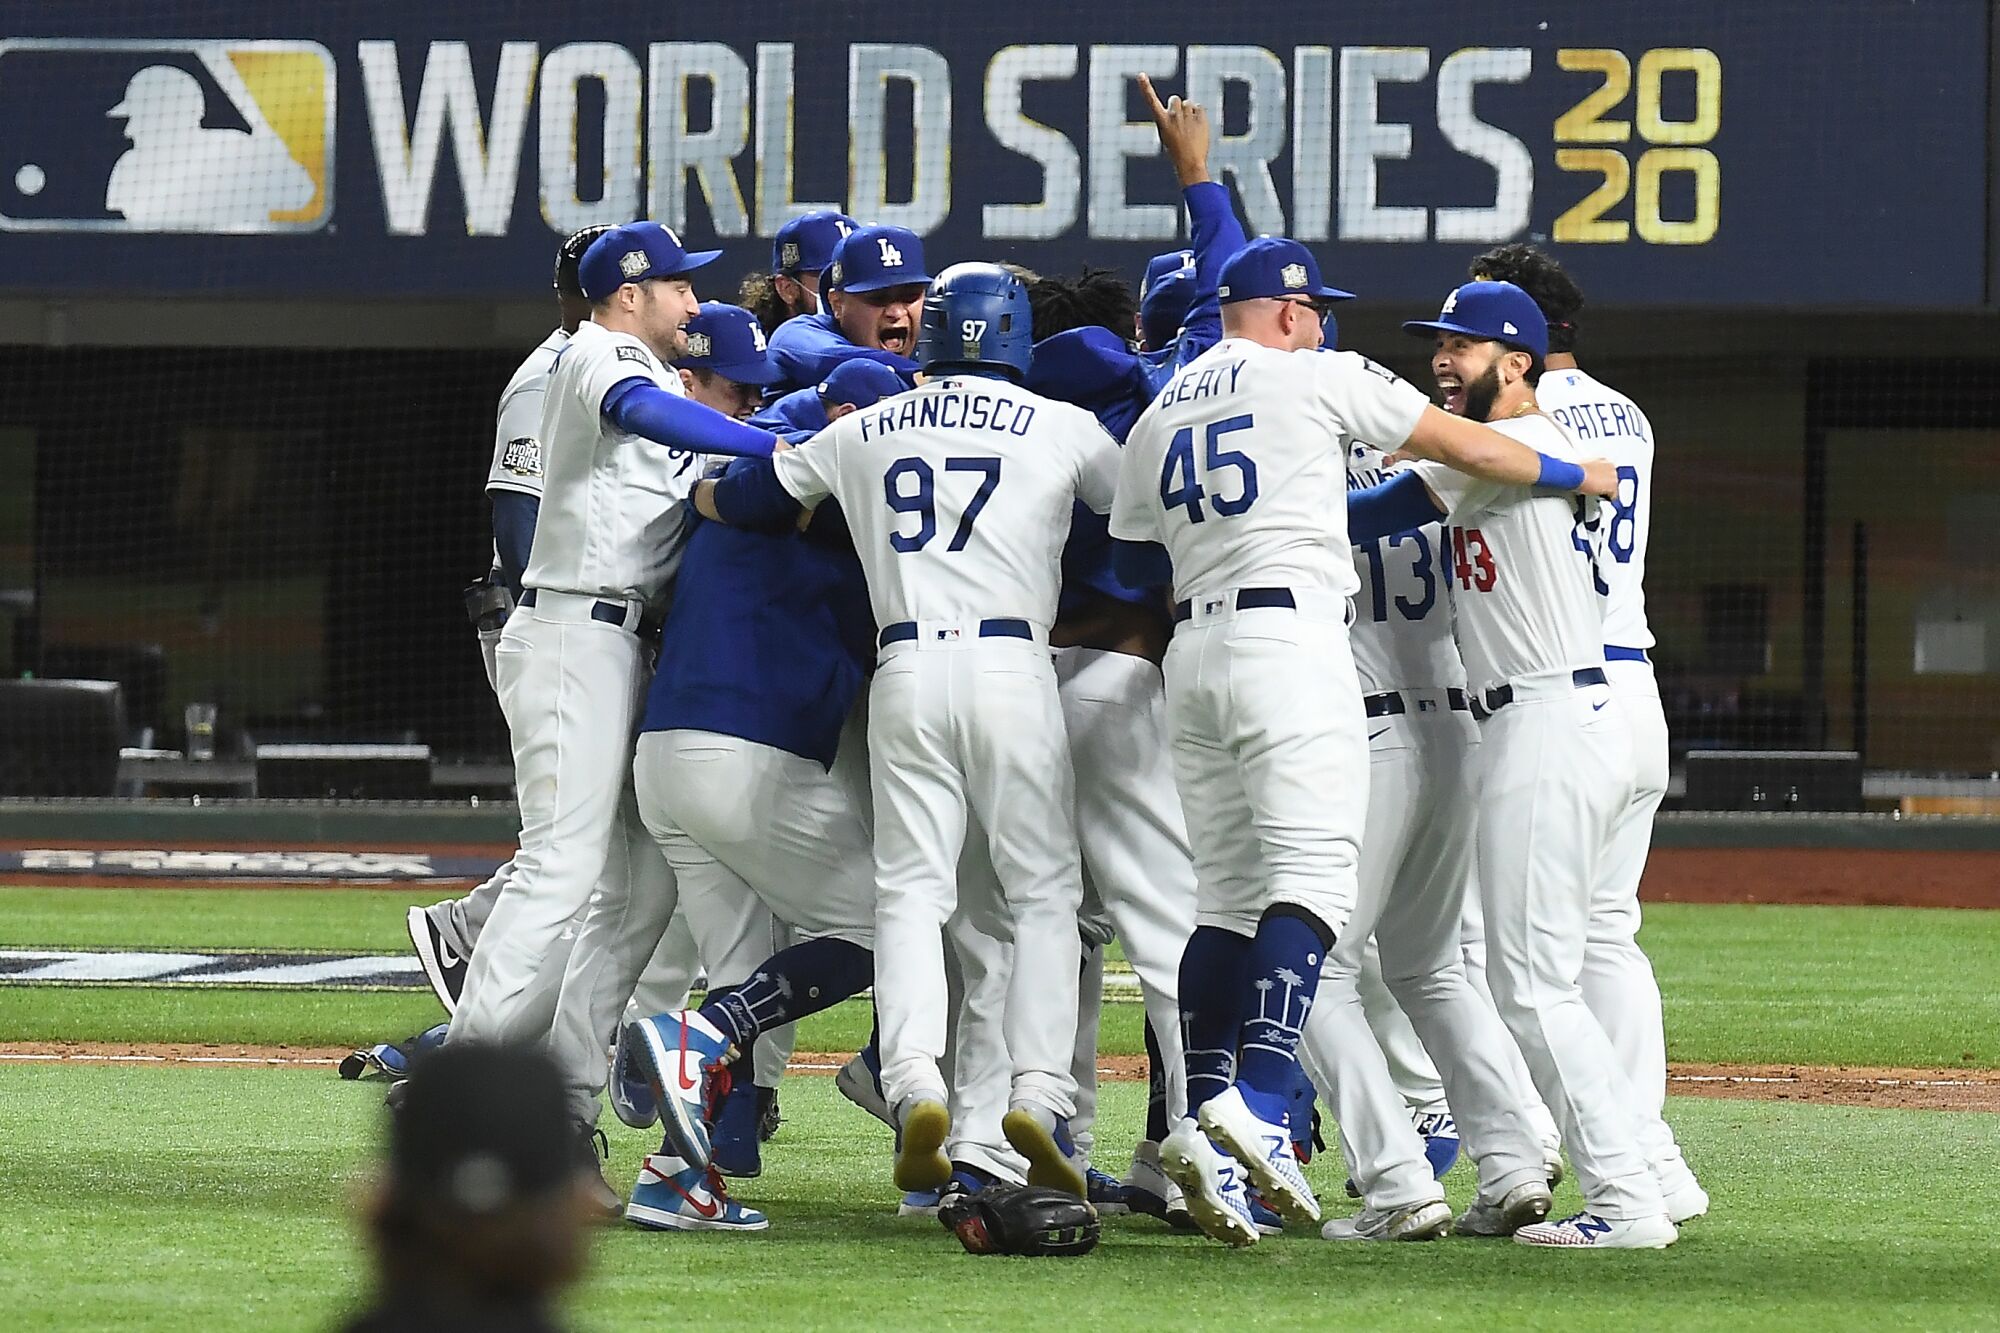 Dodgers players celebrate after defeating the Tampa Bay Rays in Game 6 of the World Series.